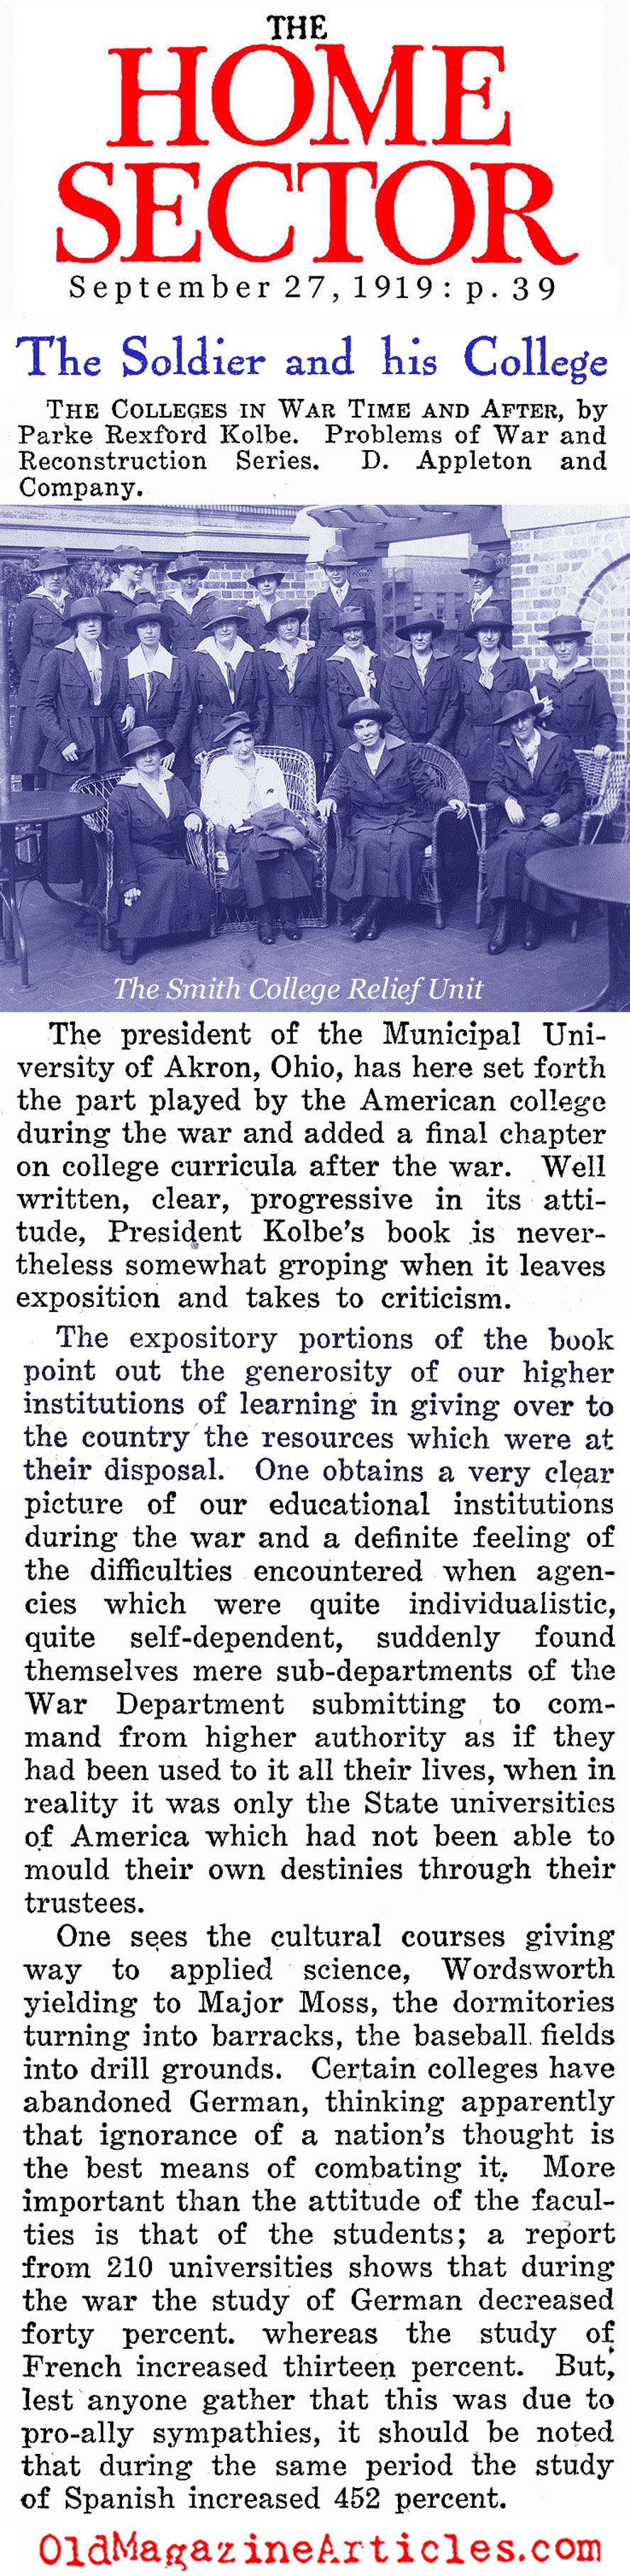 American Colleges During W.W. I (Home Sector, 1919)